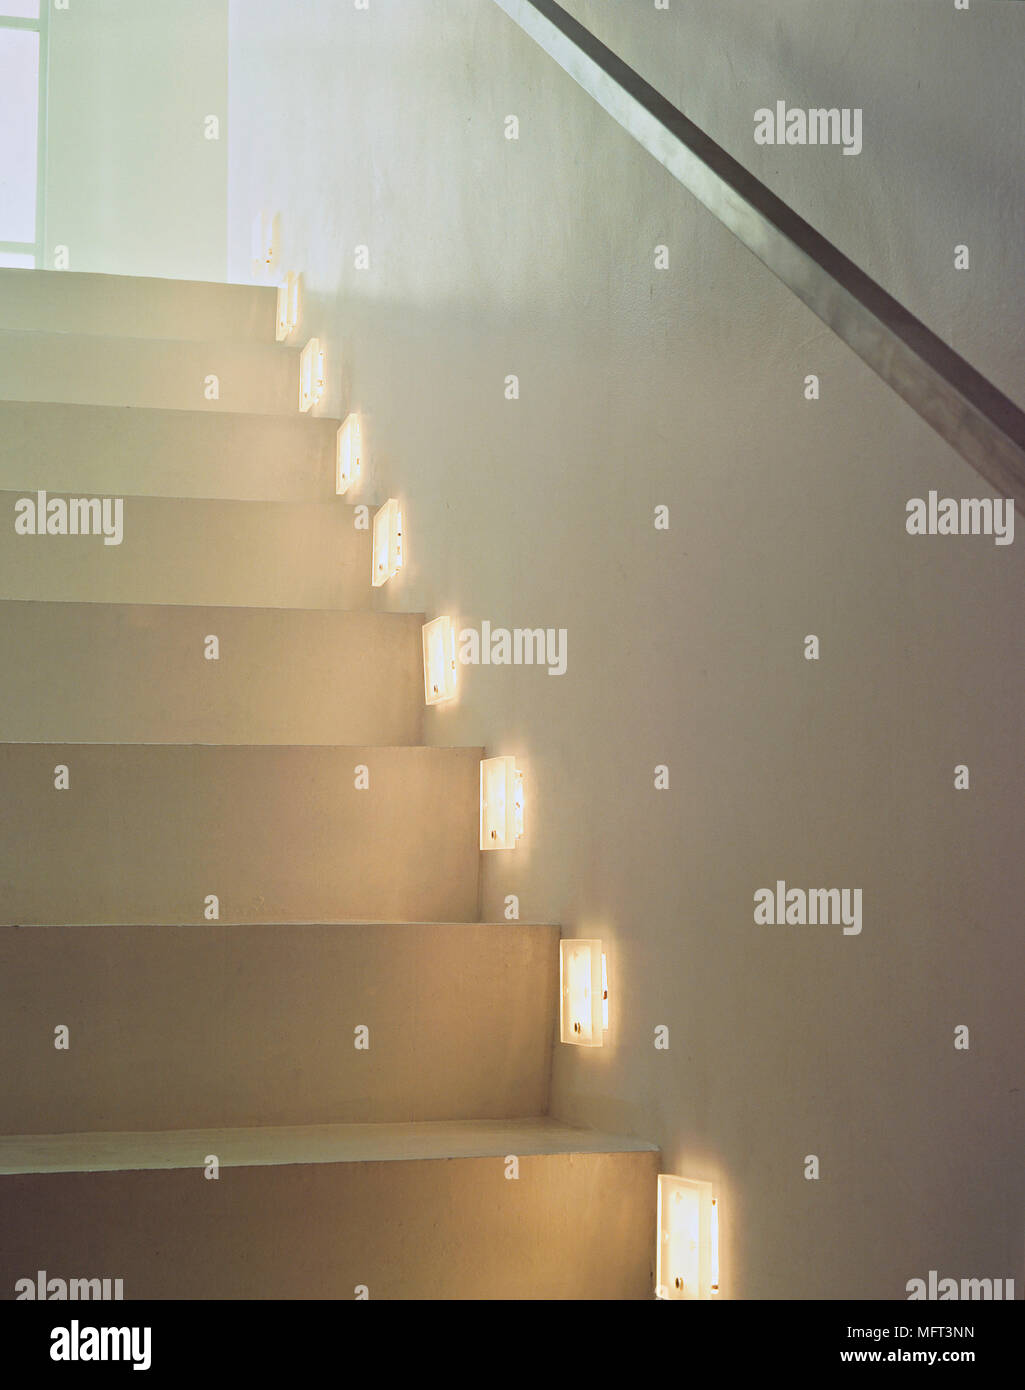 Close-up view of modern style staircase with low-level wall lighting Stock Photo